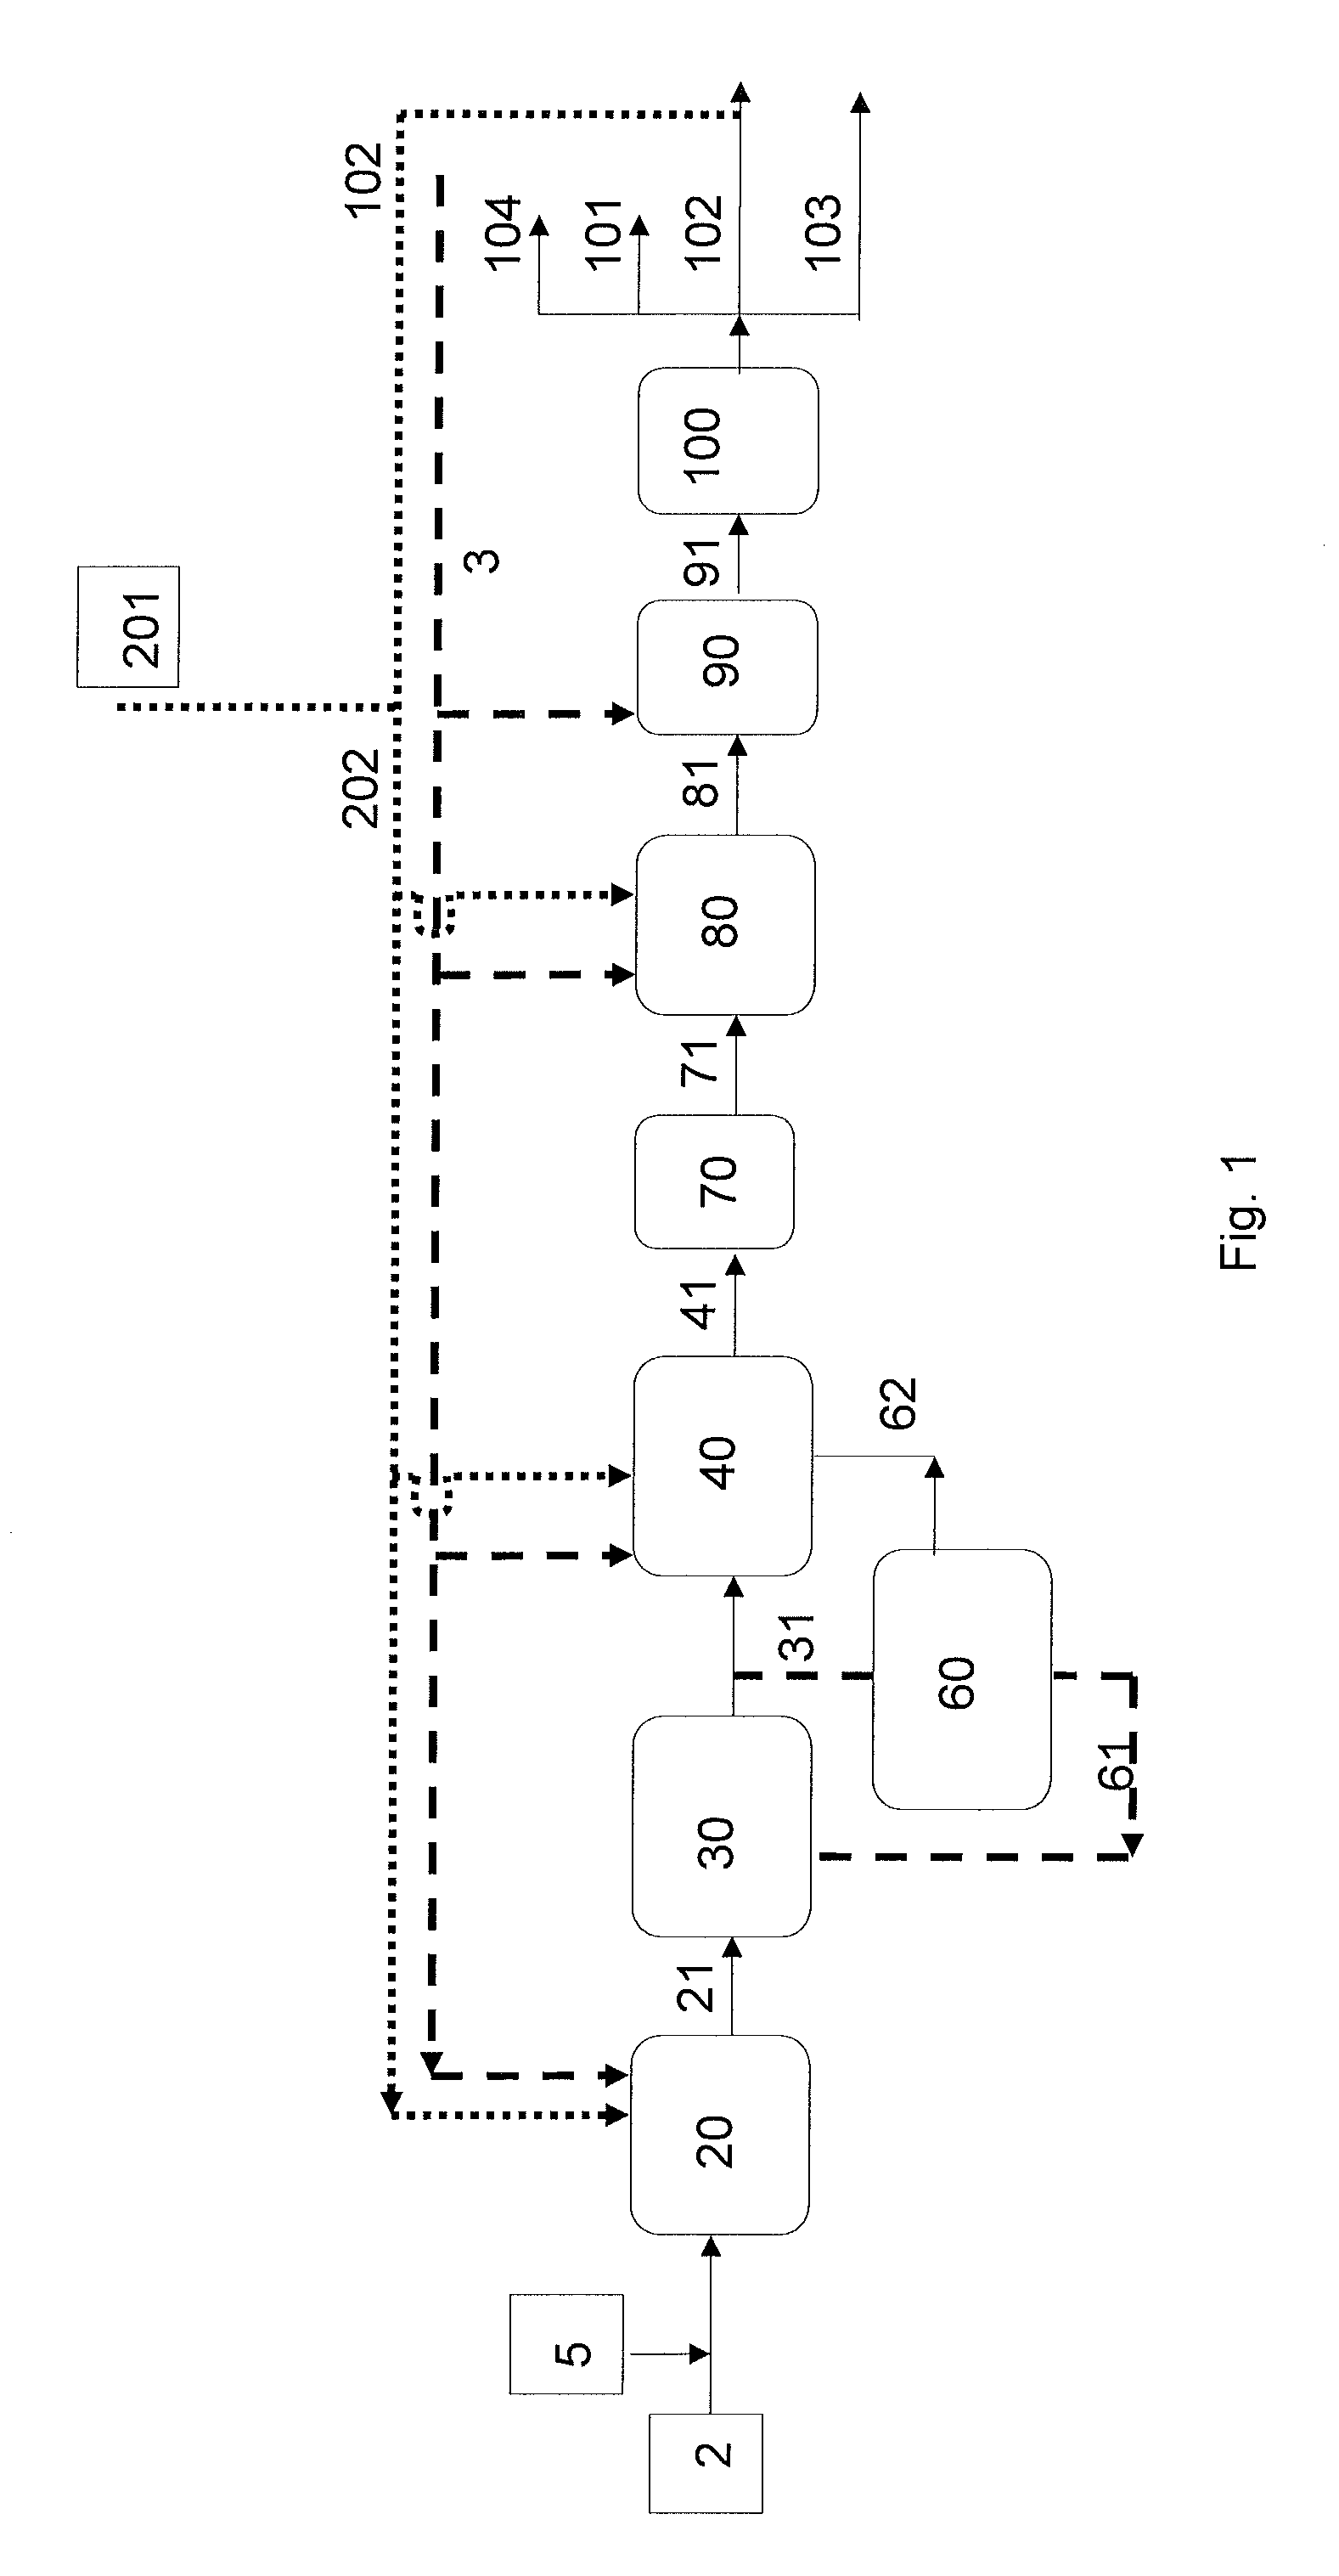 Process for producing a branched hydrocarbon base oil from a feedstock containing aldehyde and/or ketone